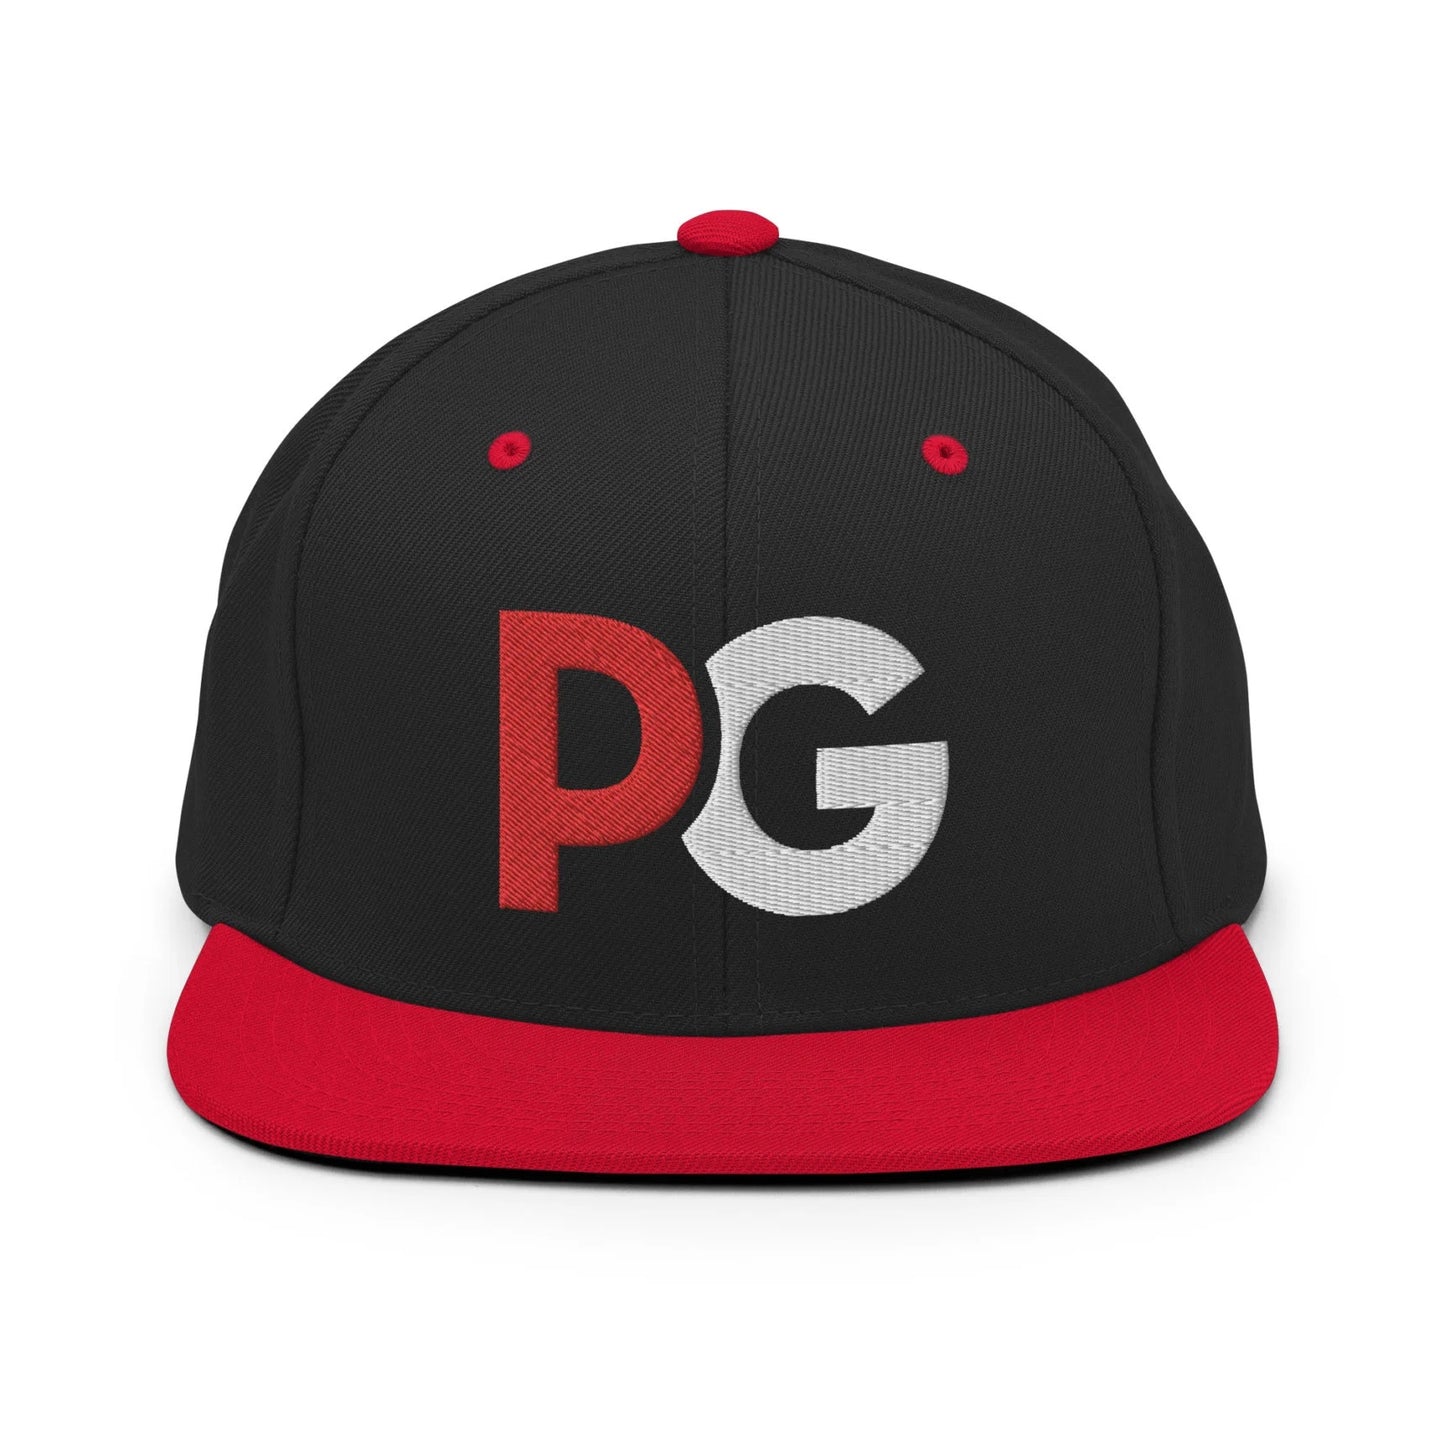 ProfesorGamingTV Snapback Hat by ShowZone in black with red brim and accents